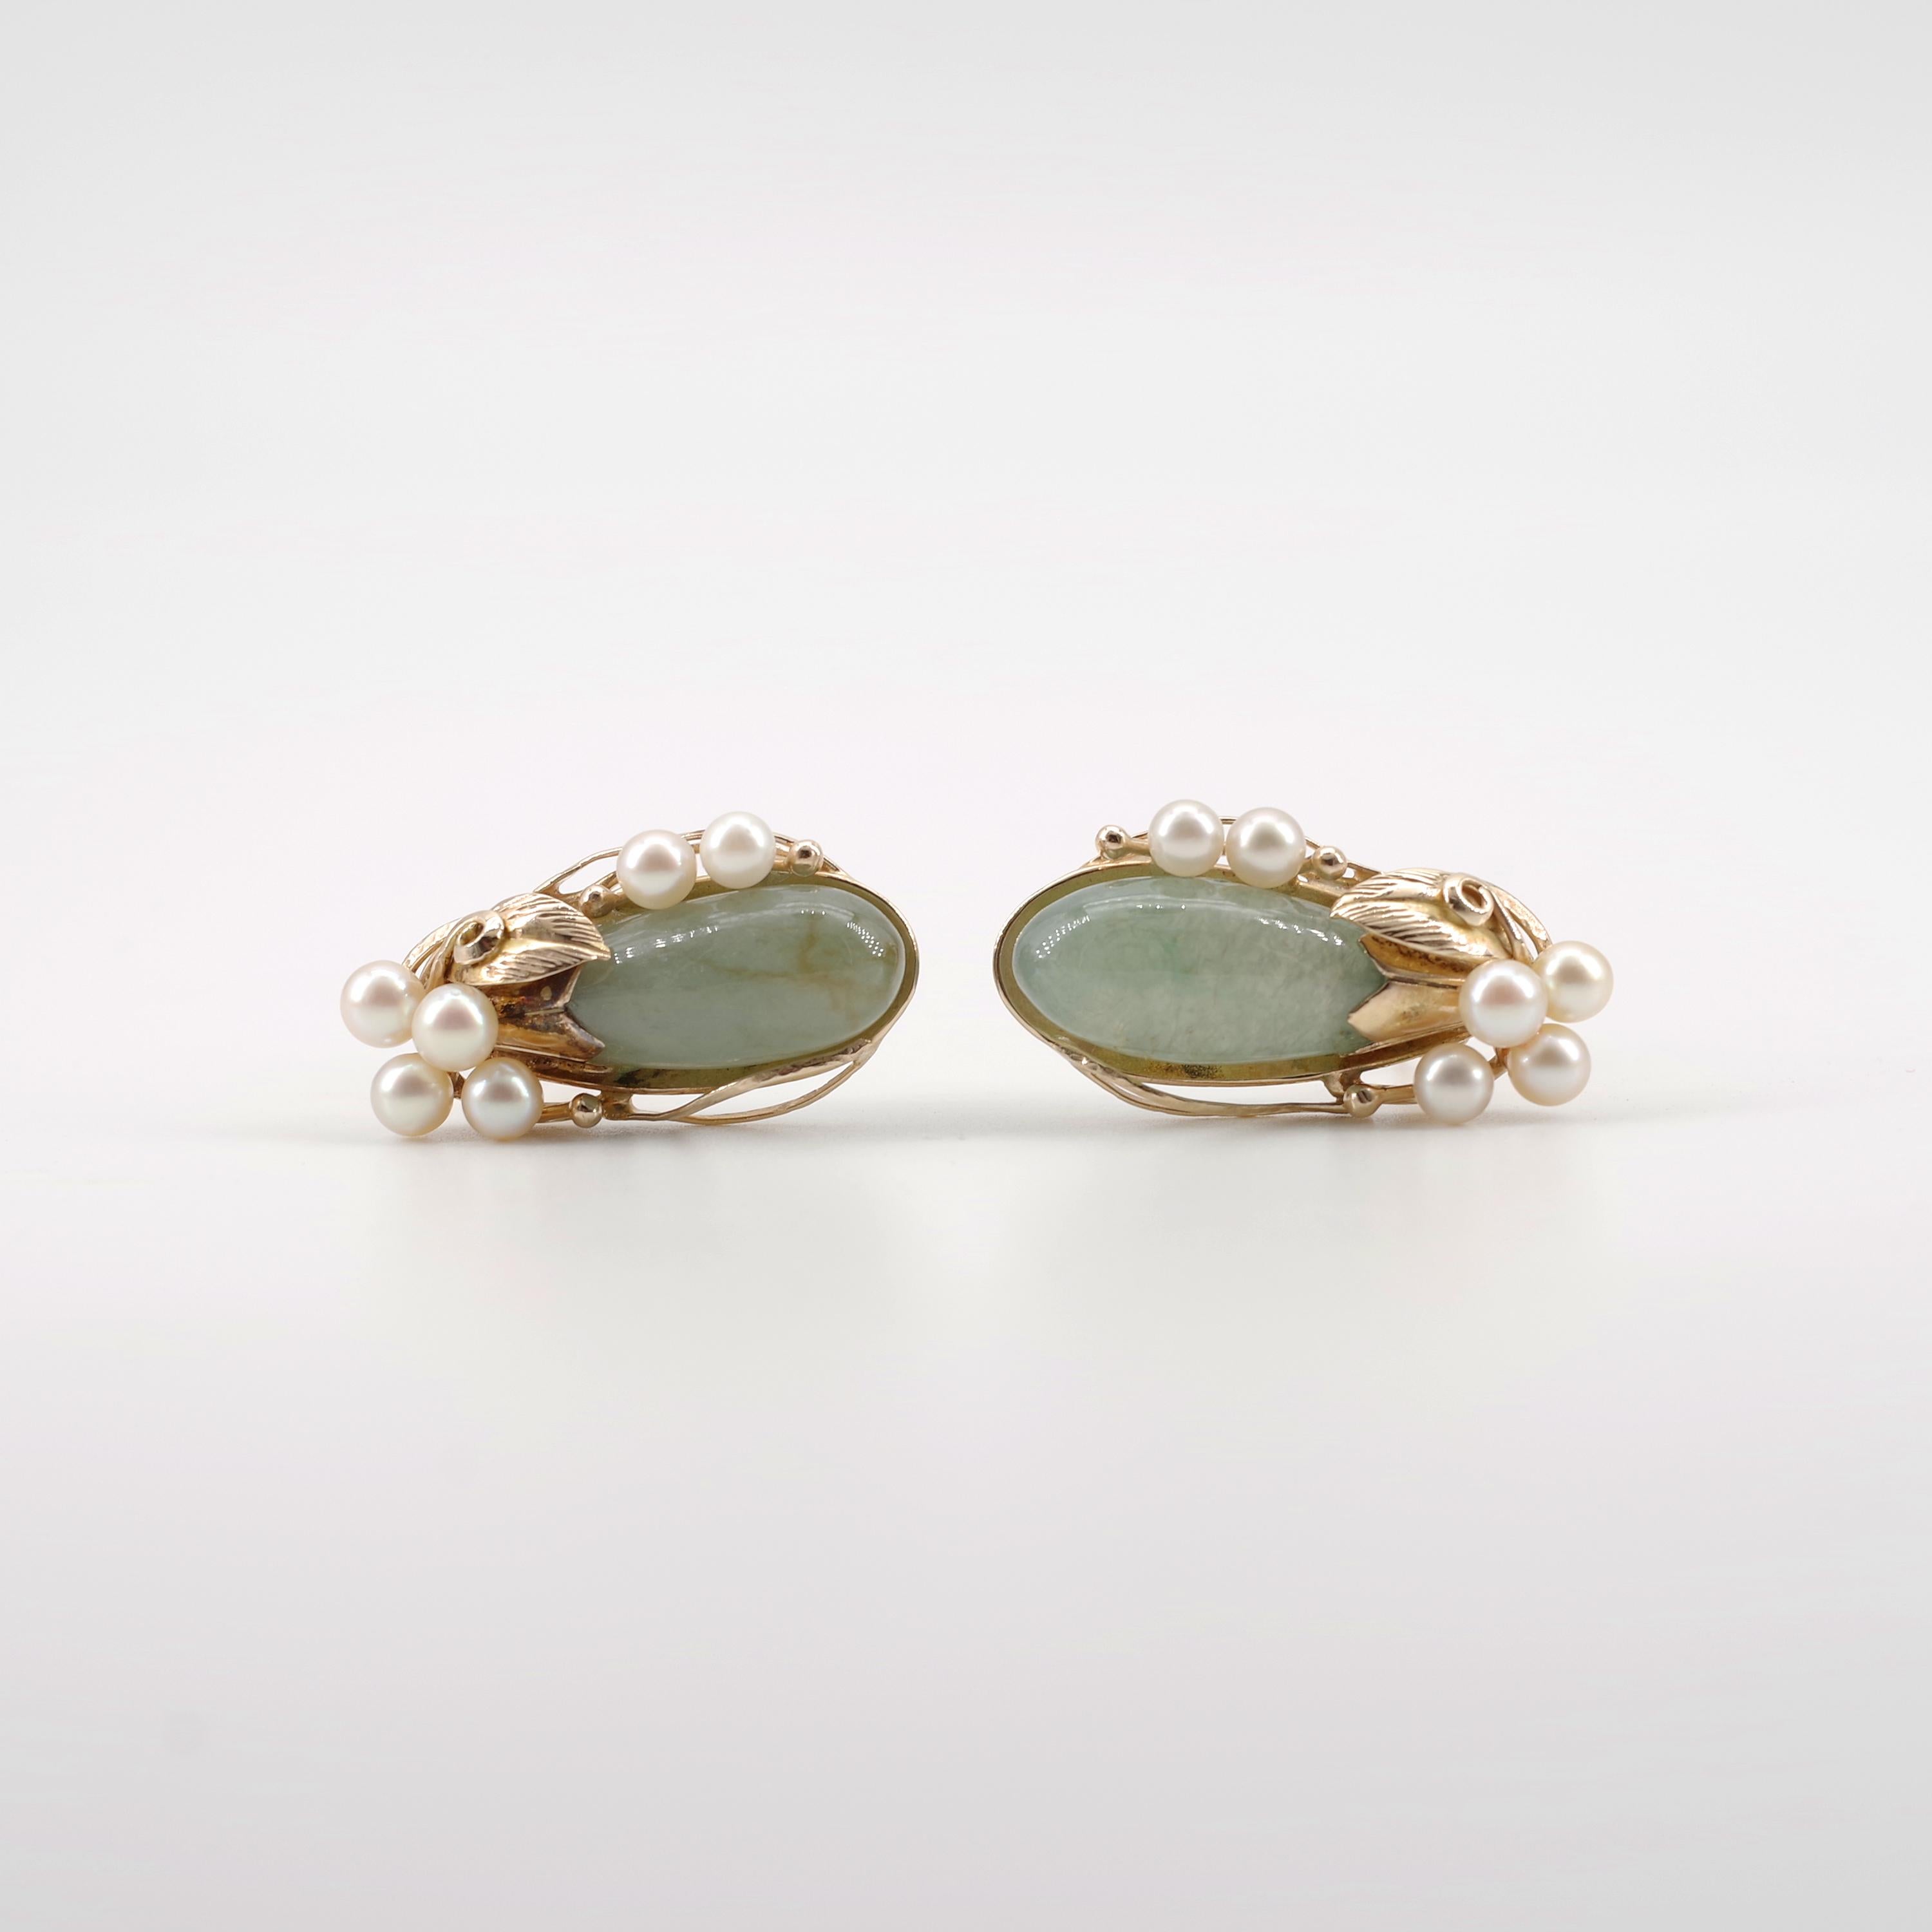 These 14k yellow gold clip-on earrings were created in the 1960s by Ming's, a jewelry store that opened on Hawaii in the 1940s and became iconic, beloved for their fine jade, pearl and coral jewelry. Ming's jade pieces are instantly recognizable